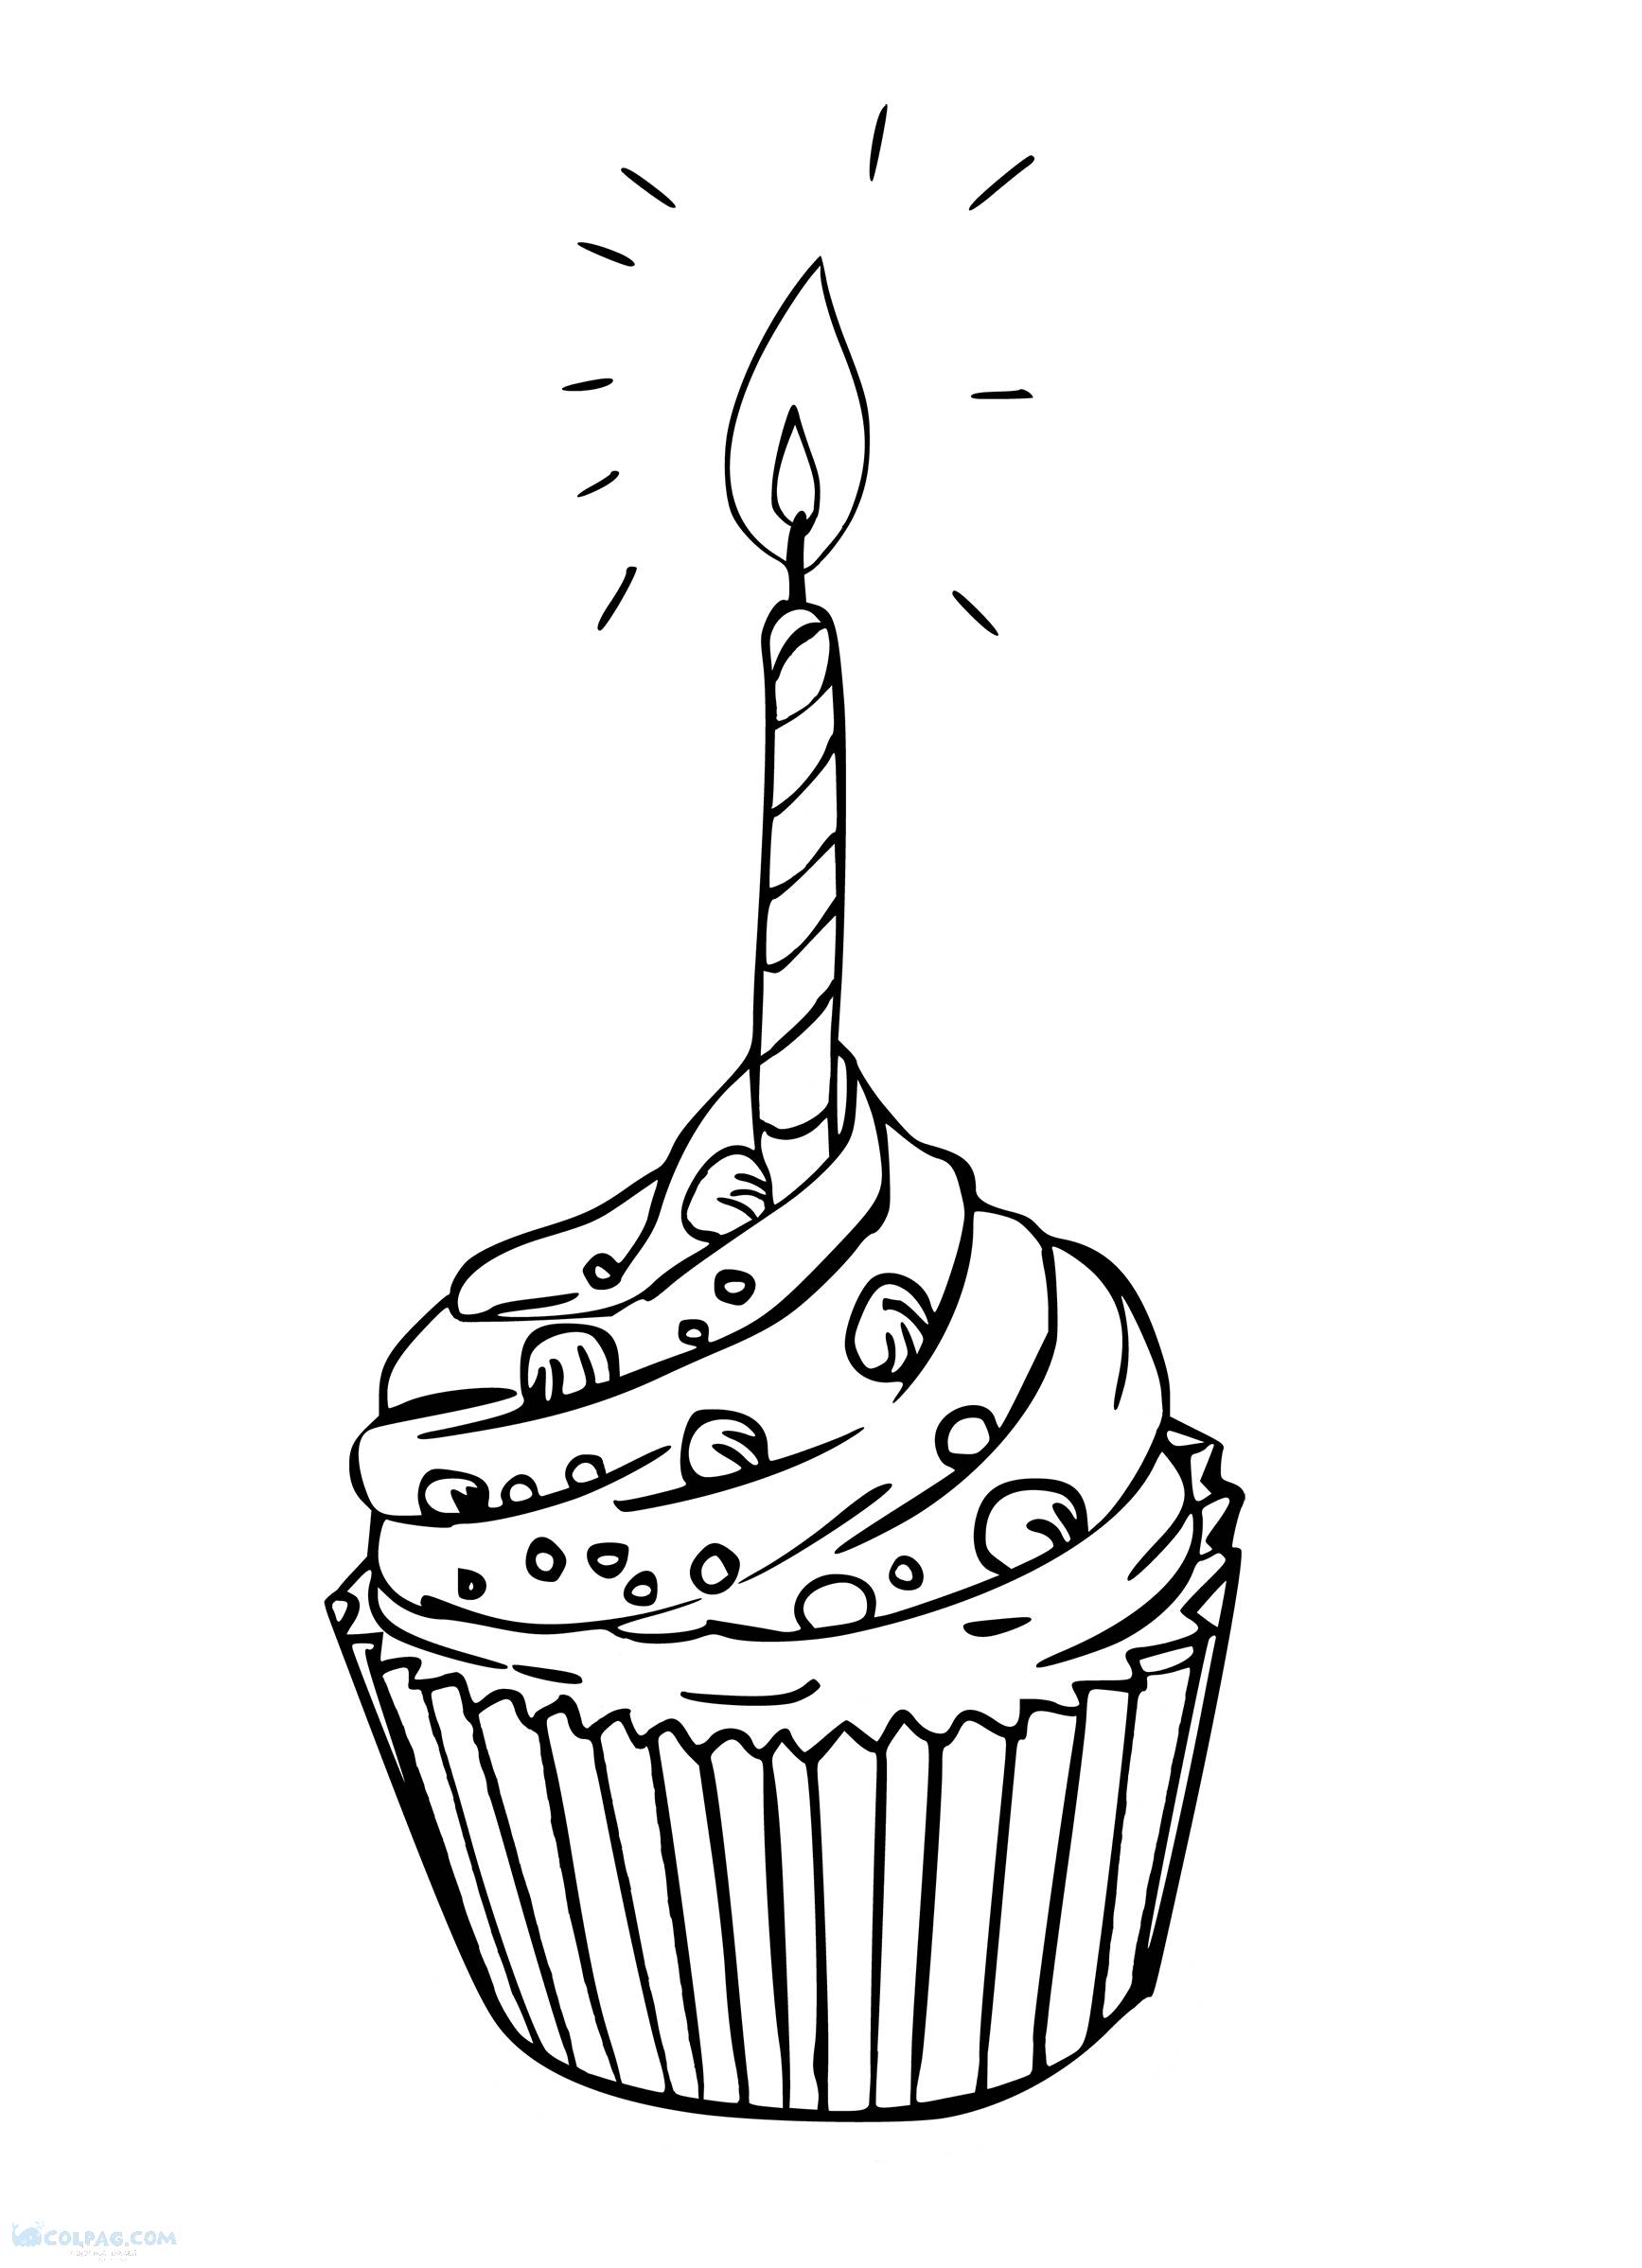 Birthday Cake Coloring Pages